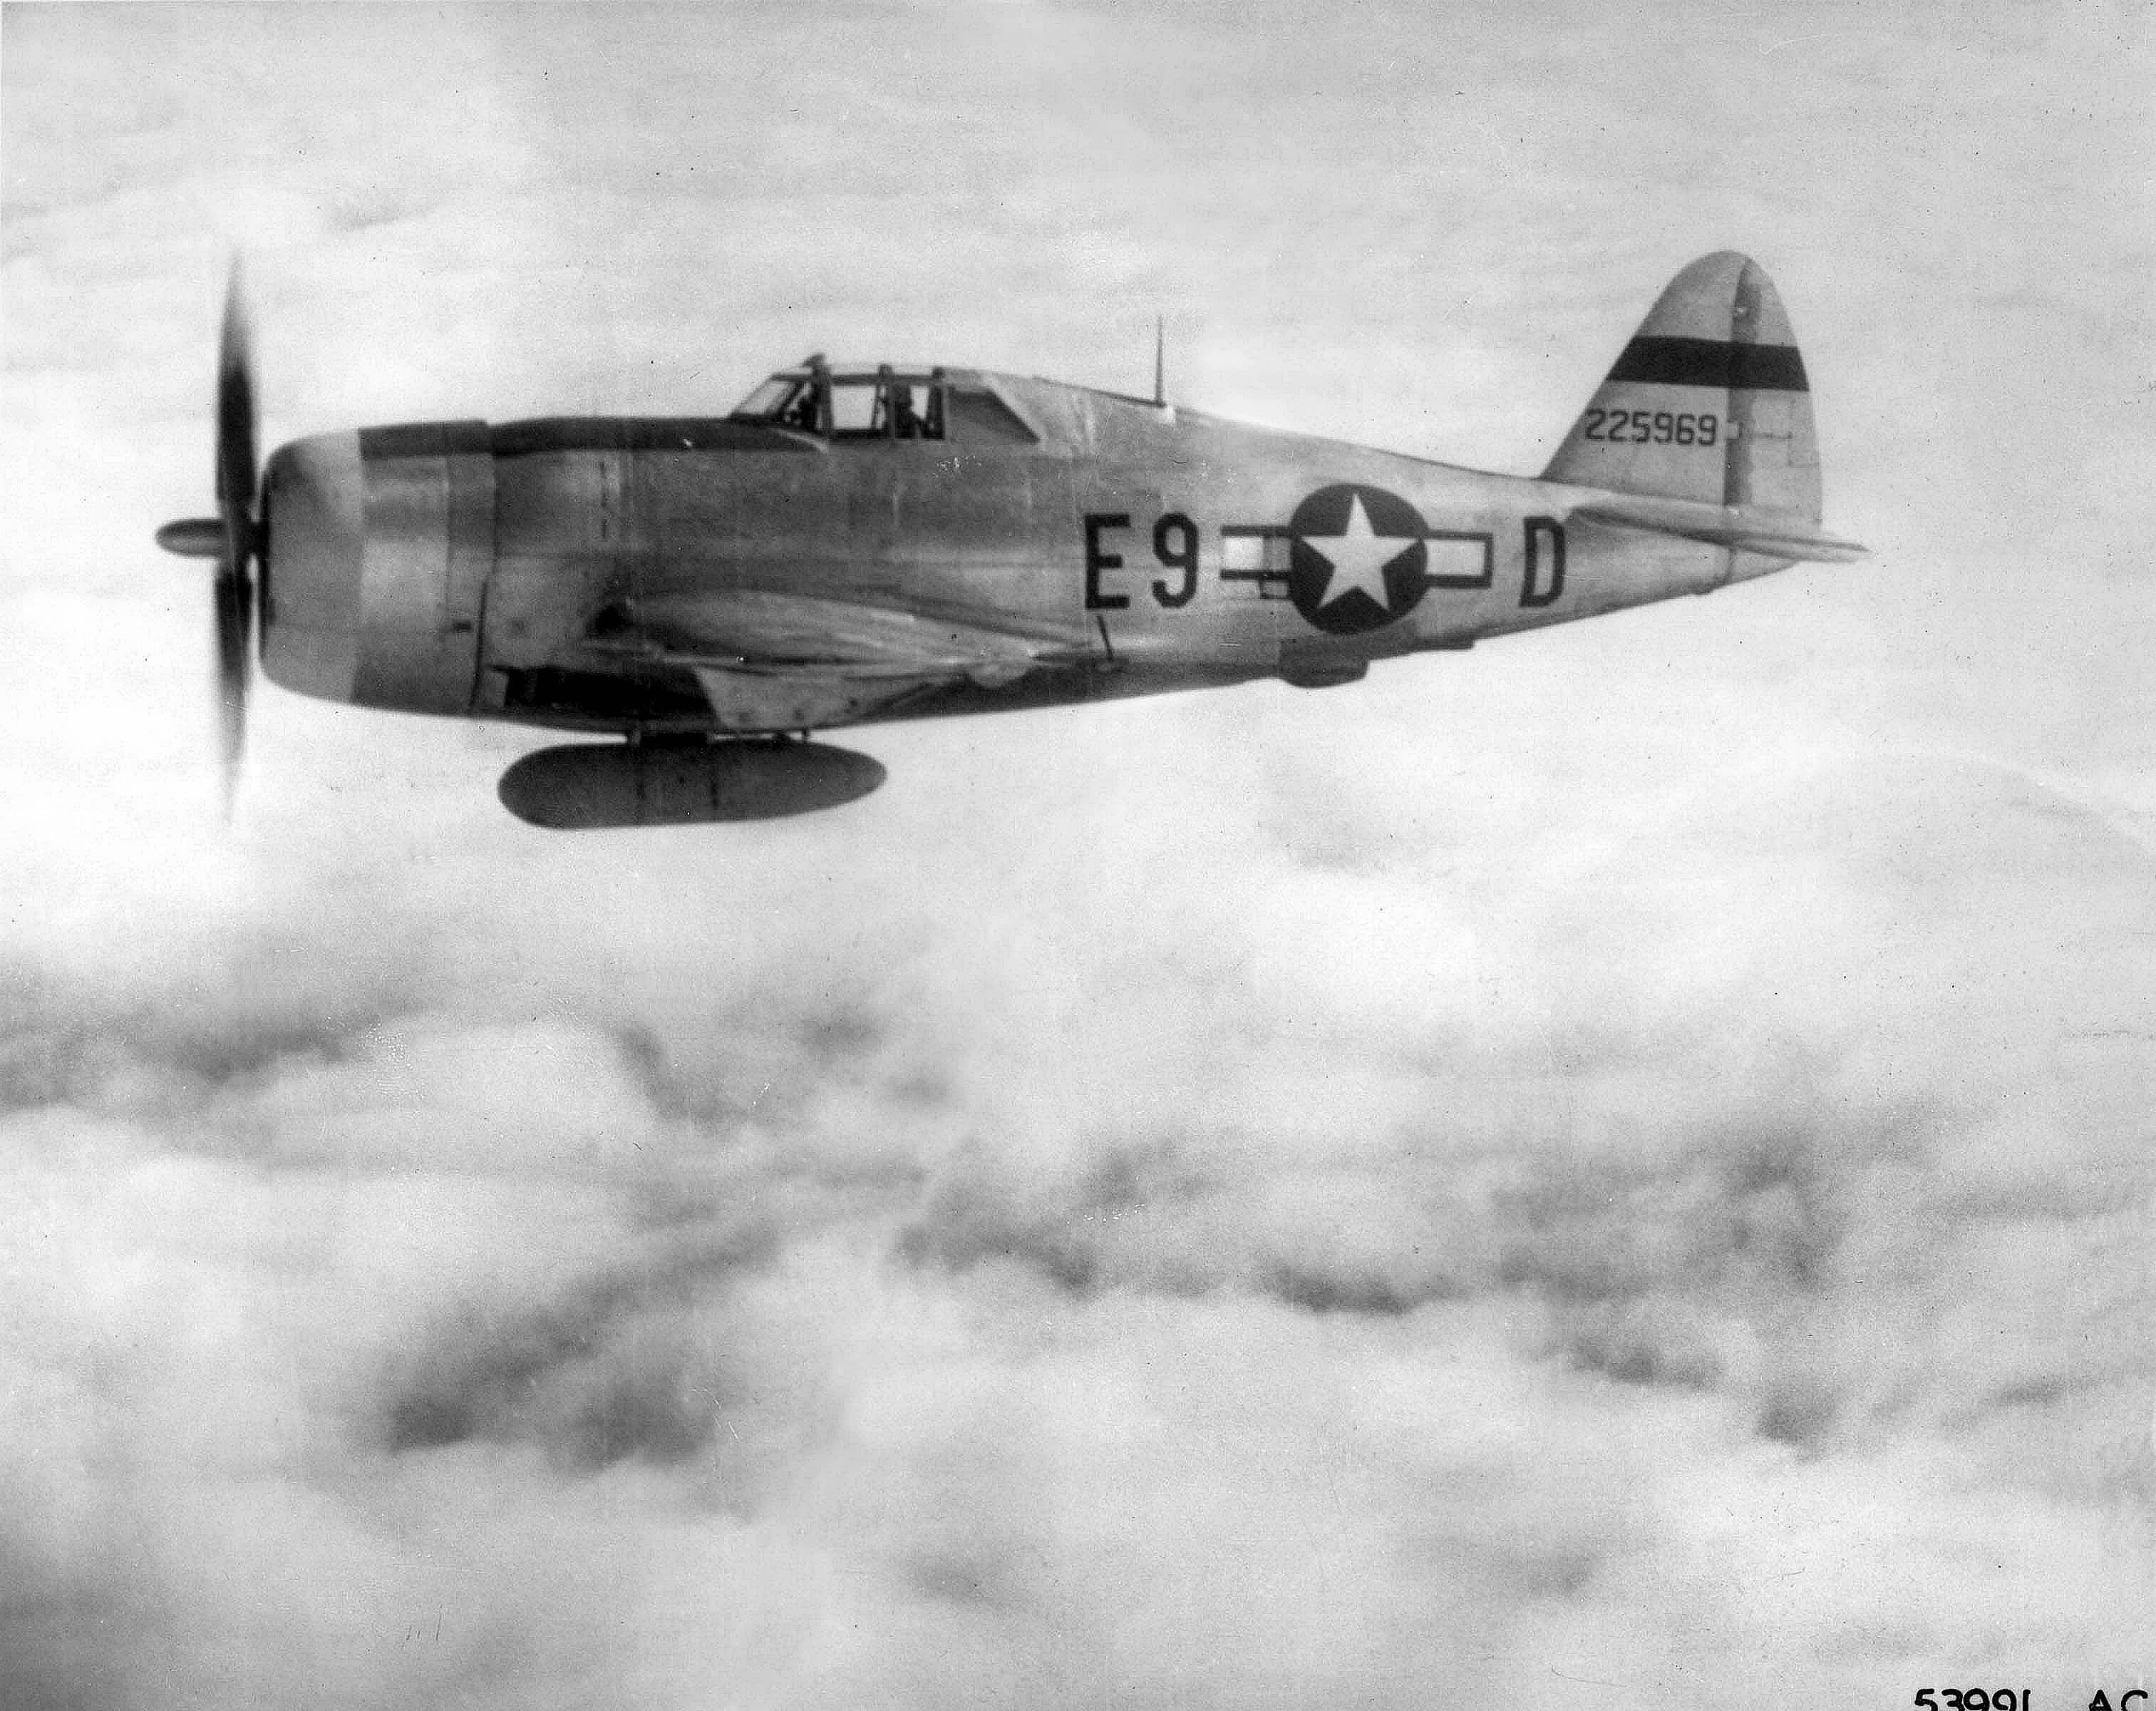 361st Fighter Group, 376th Fighter Squadron, US 8th Air Force Captain John D. Duncan's P-47D Thunderbolt fighter in flight over RAF Little Walden, England, United Kingdom, mid-1944